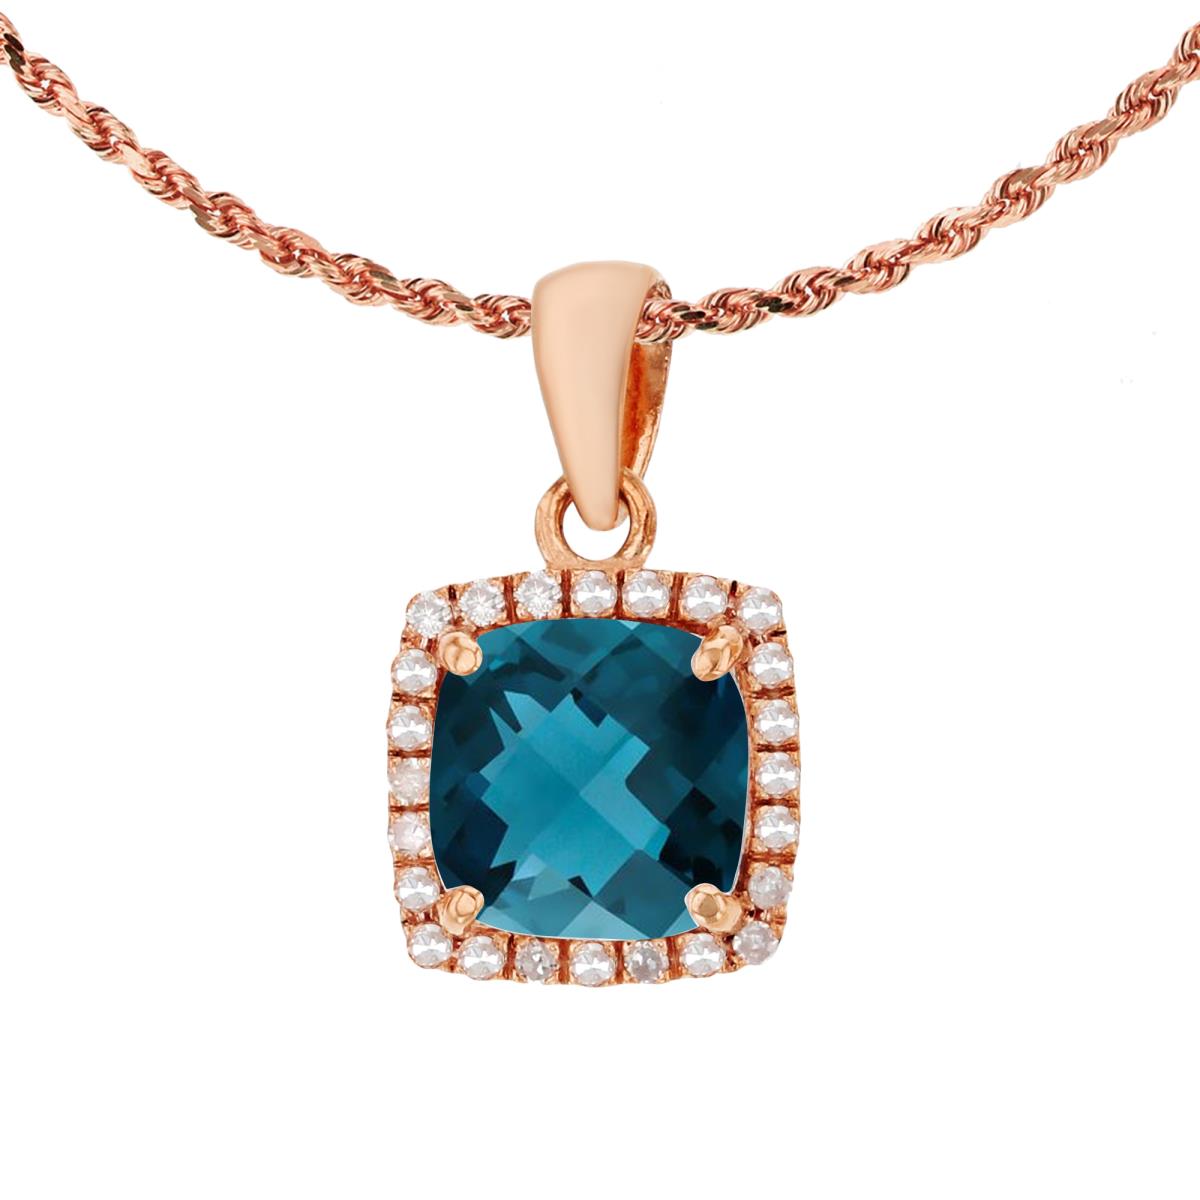 10K Rose Gold 7mm Cushion London Blue Topaz & 0.12 CTTW Diamond Halo 18" Rope Chain Necklace